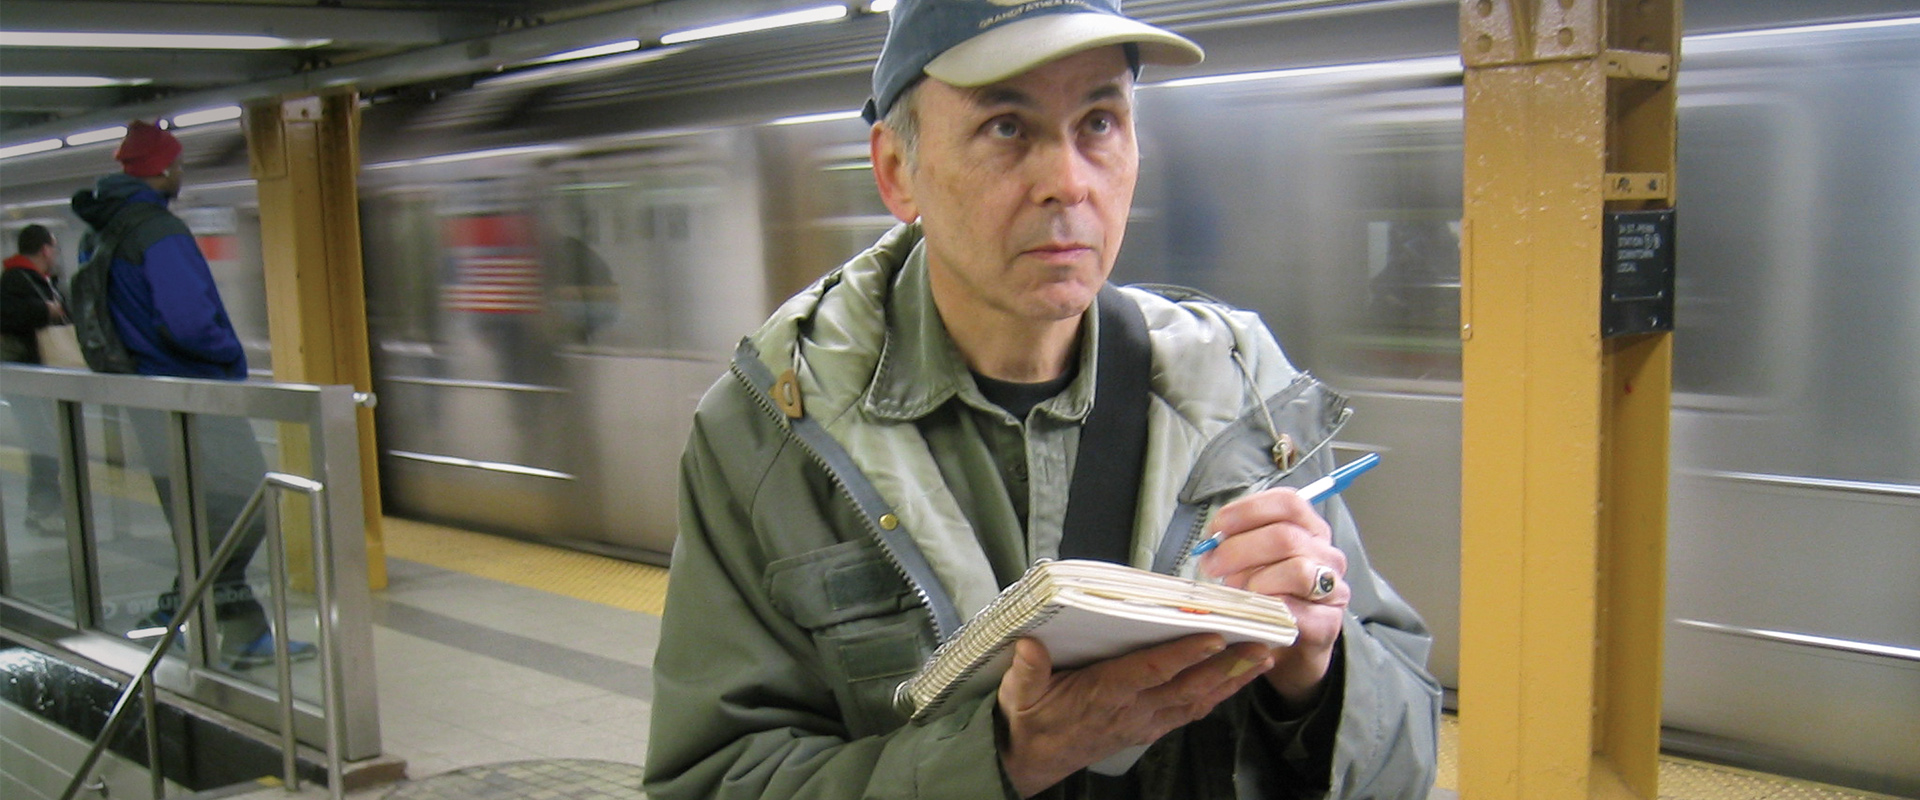 A man with a notebook stands on a platform and considers a train in motion.